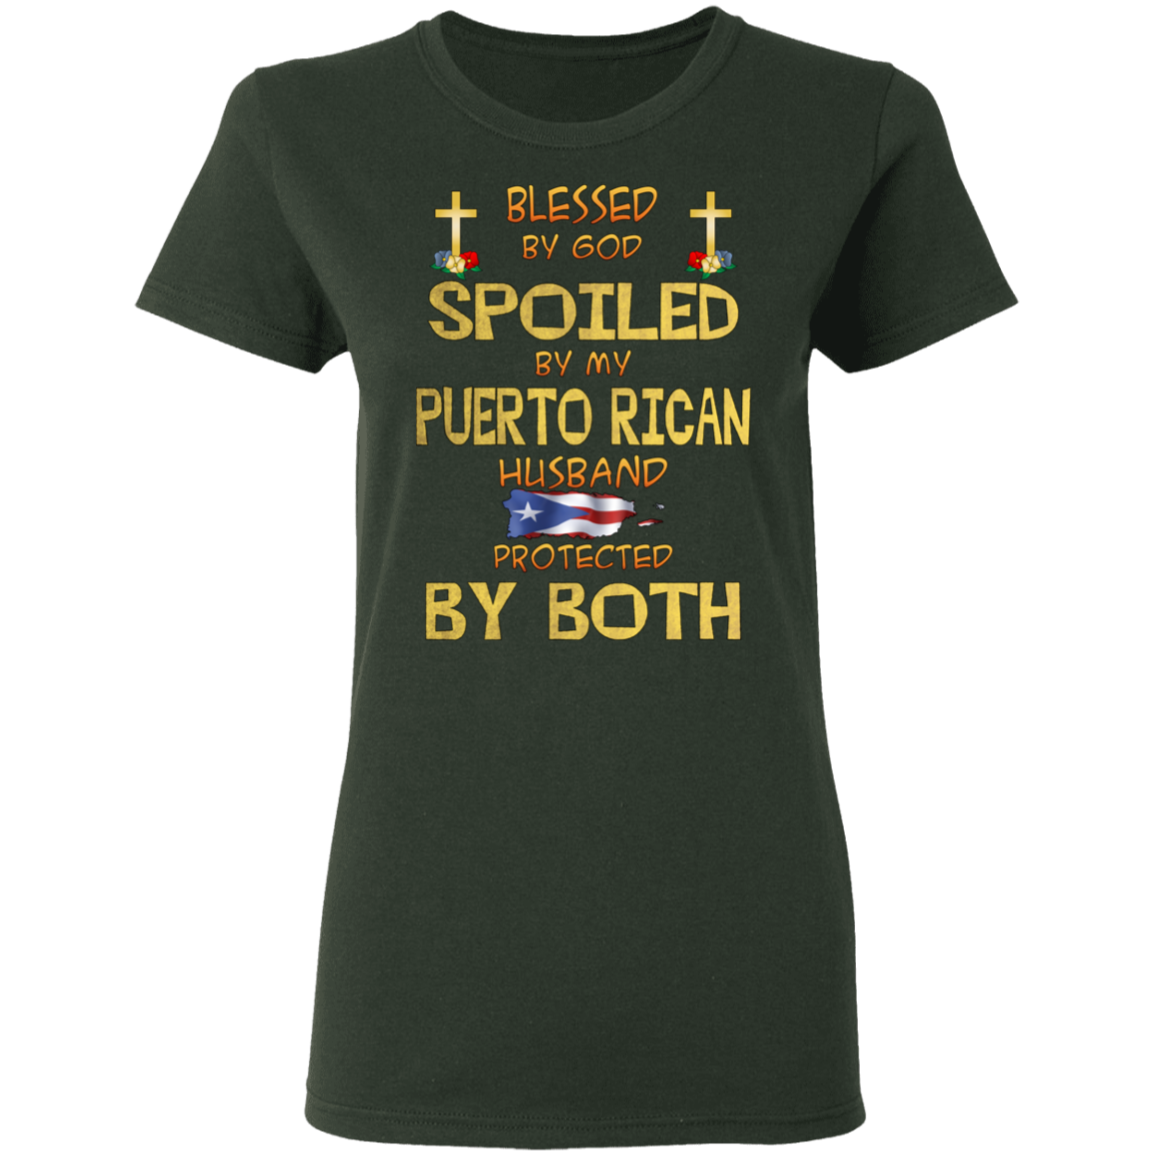 Blessed and Protected Ladies' 5.3 oz. T-Shirt - Puerto Rican Pride